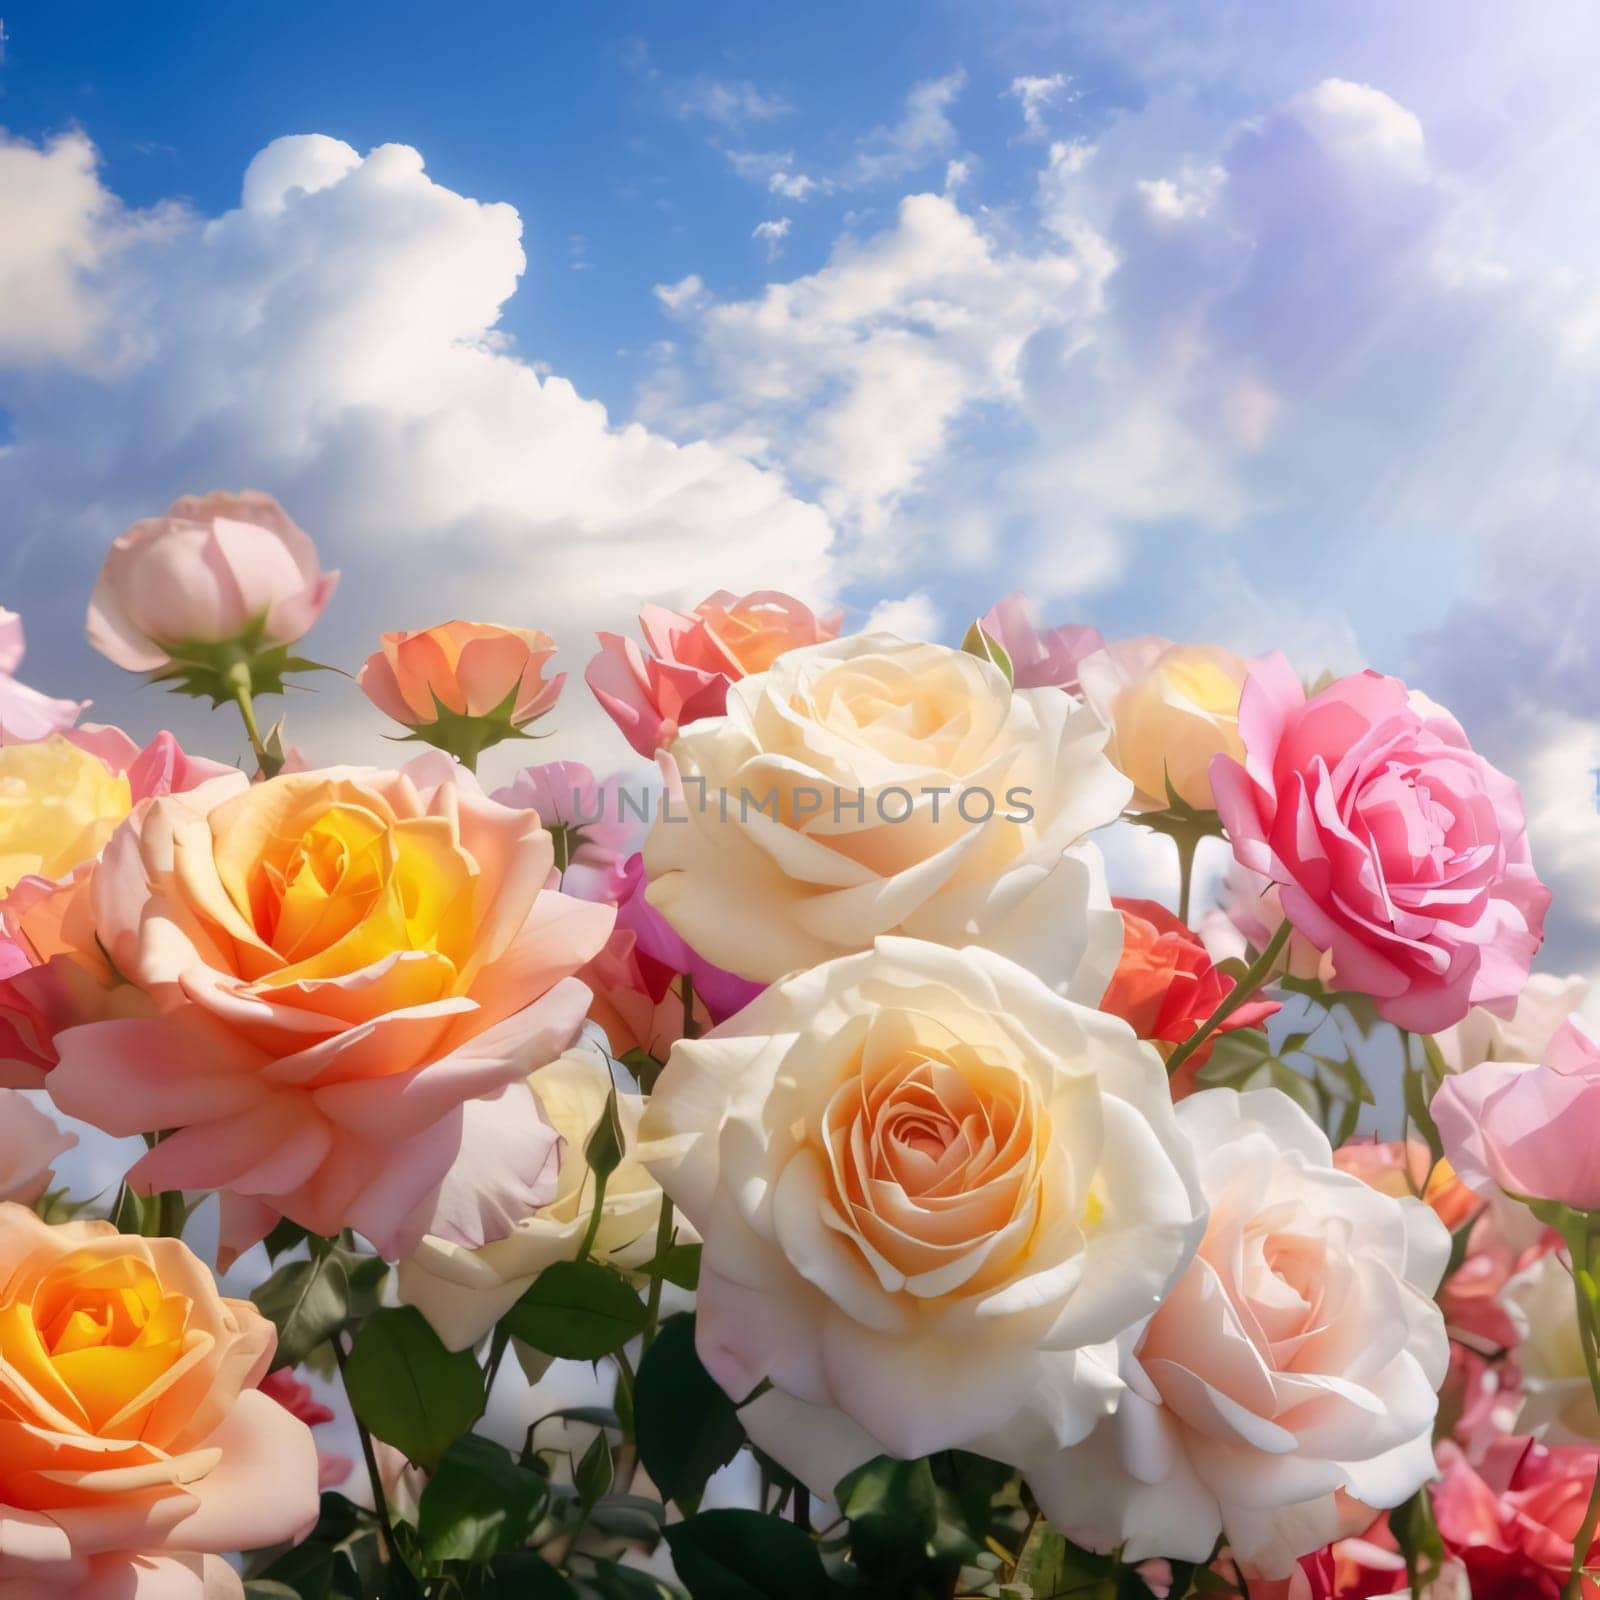 A bouquet of white and pink roses against the sky. Flowering flowers, a symbol of spring, new life. A joyful time of nature waking up to life.